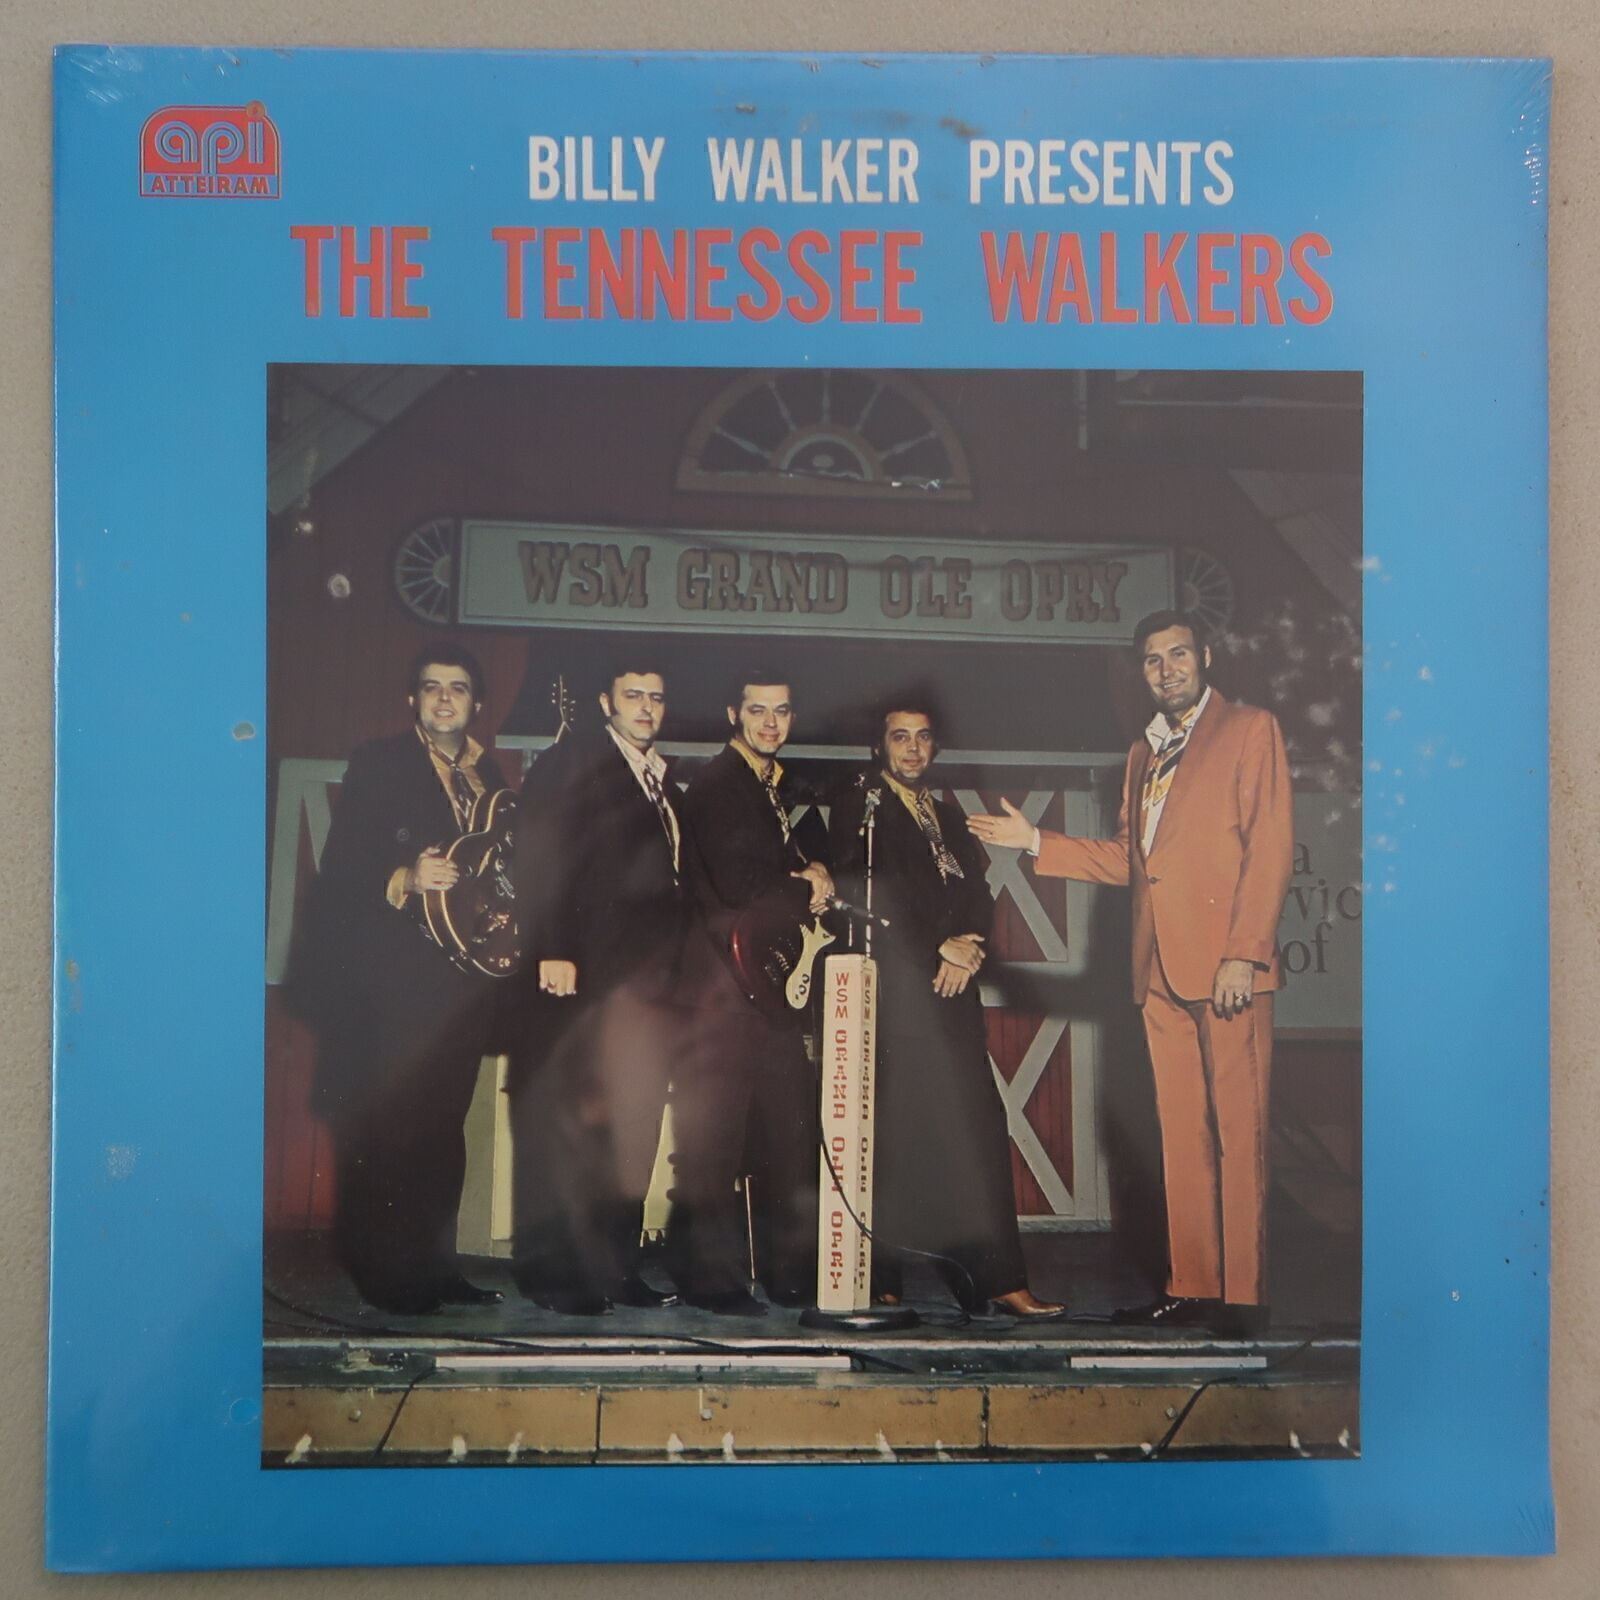 The Tennessee Walkers Vinyl LP API Atteiram Mint Factory Sealed 46